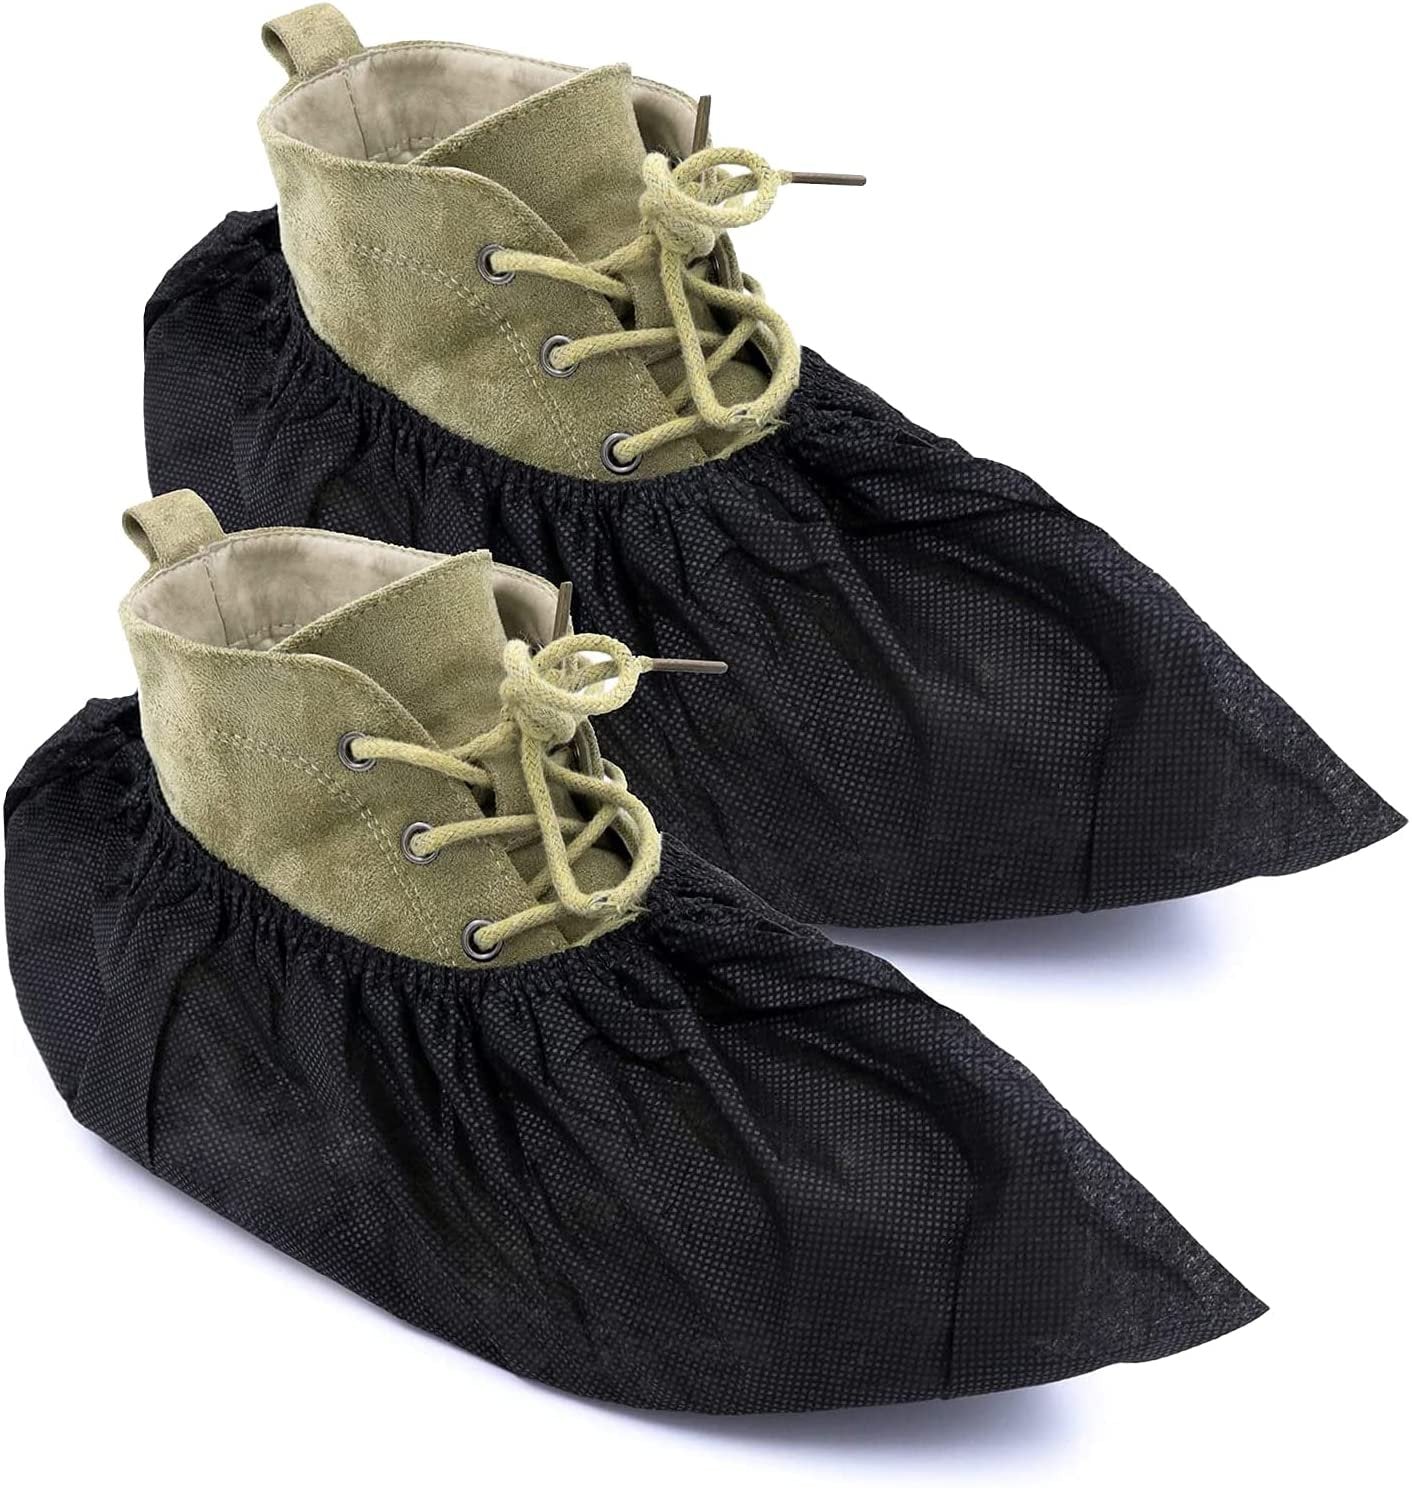 Disposable Shoe Covers 16 inches x 6 inches. Pack of 100 Black Boots